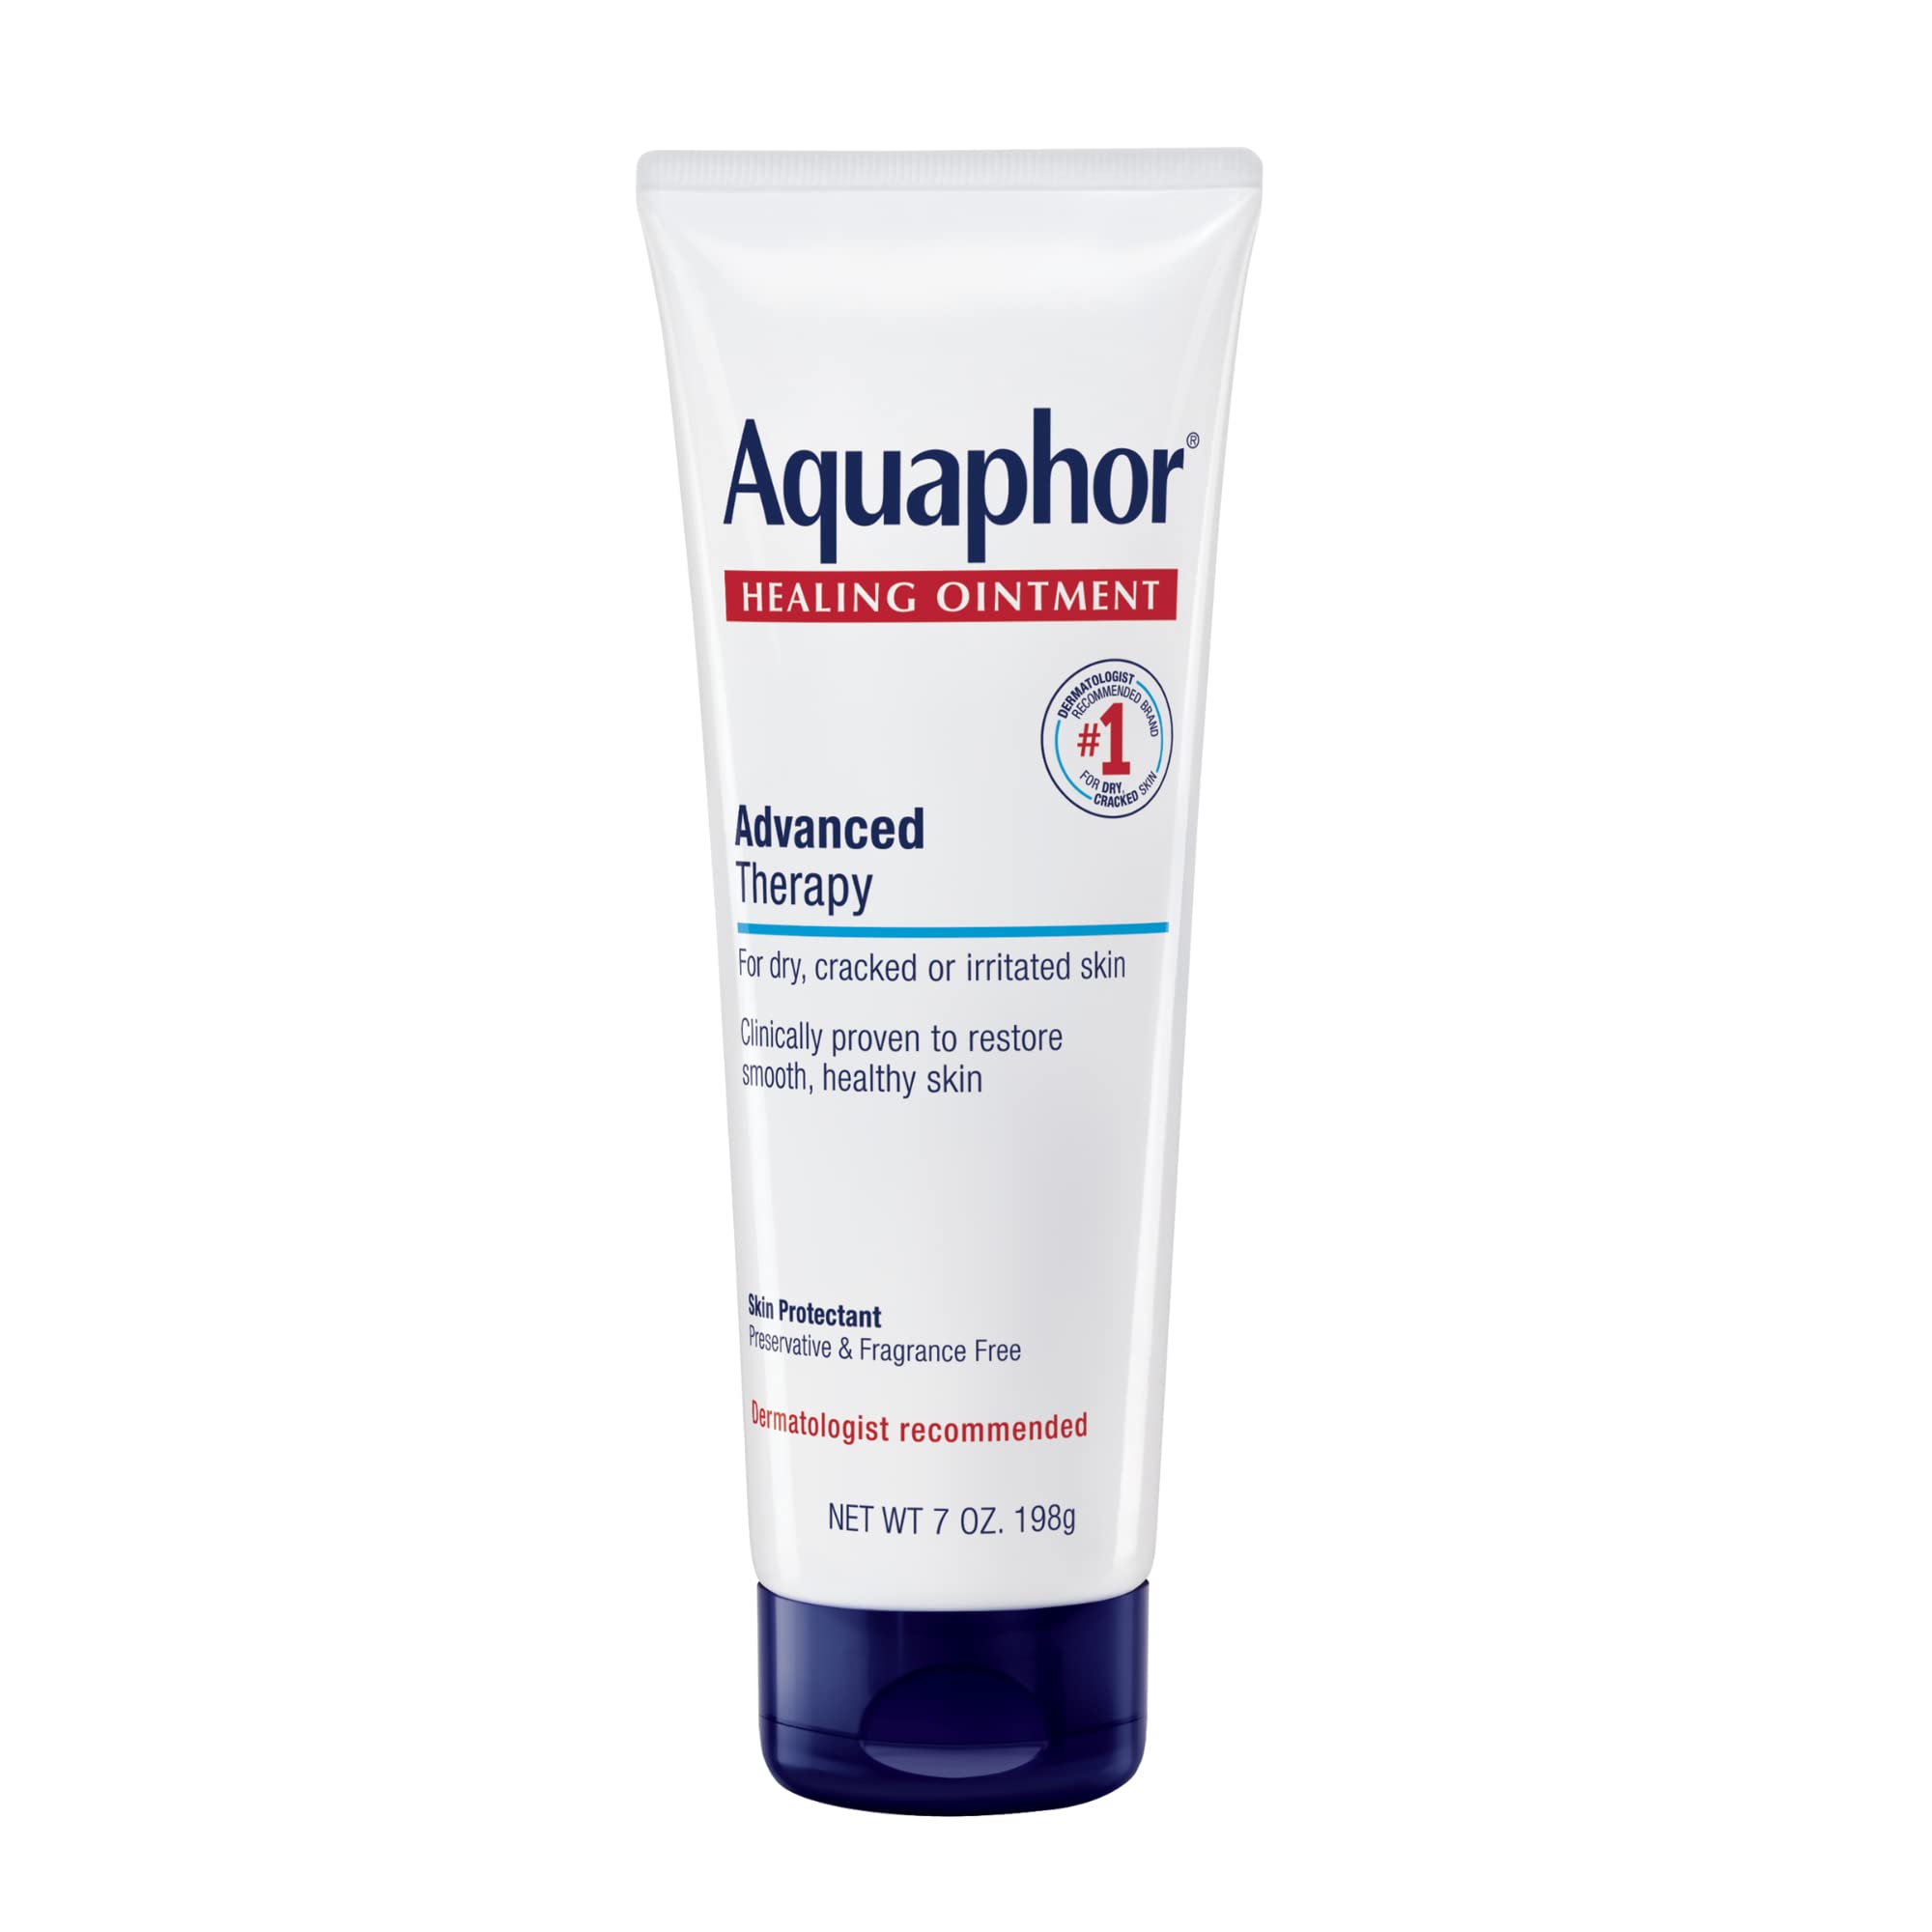 Aquaphor Advanced Therapy Healing Ointment Skin Protectant 7 oz Tube